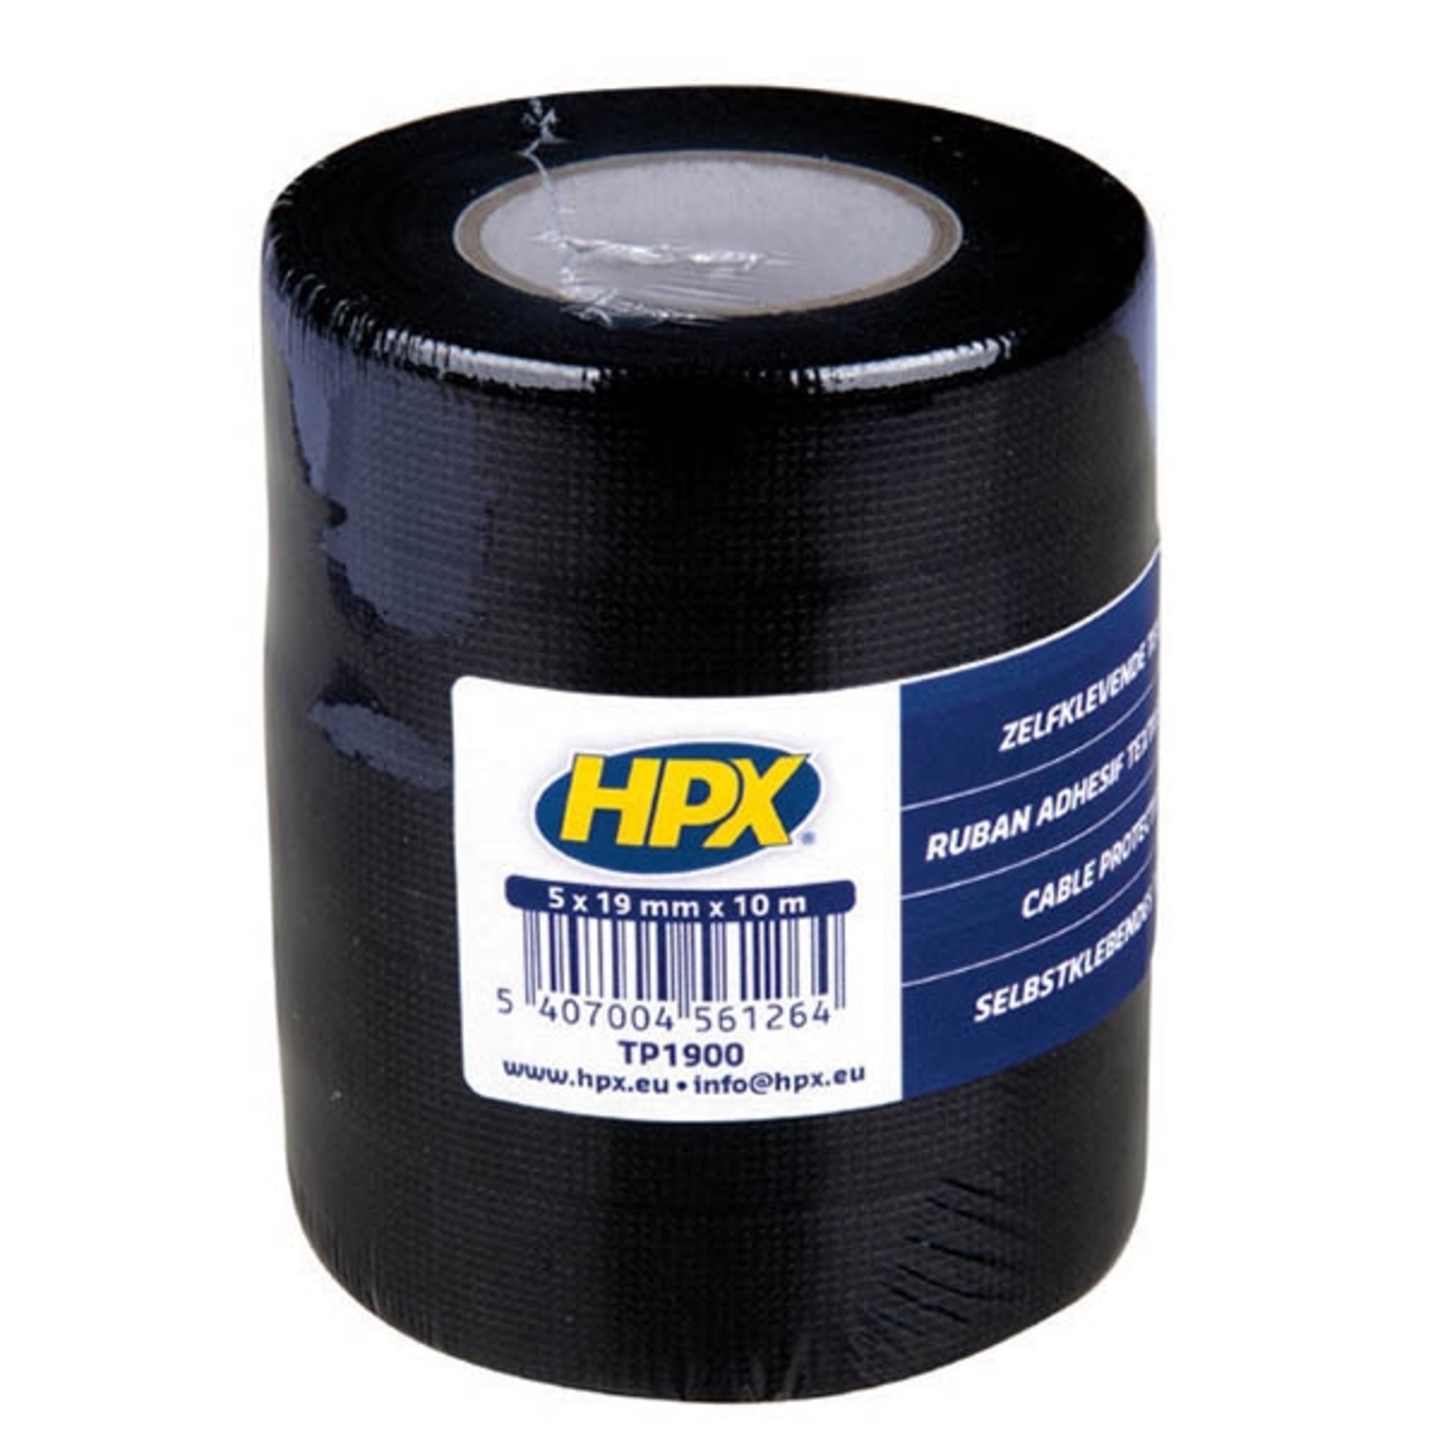 Cable protection tape 5x black 19mm x 10 m